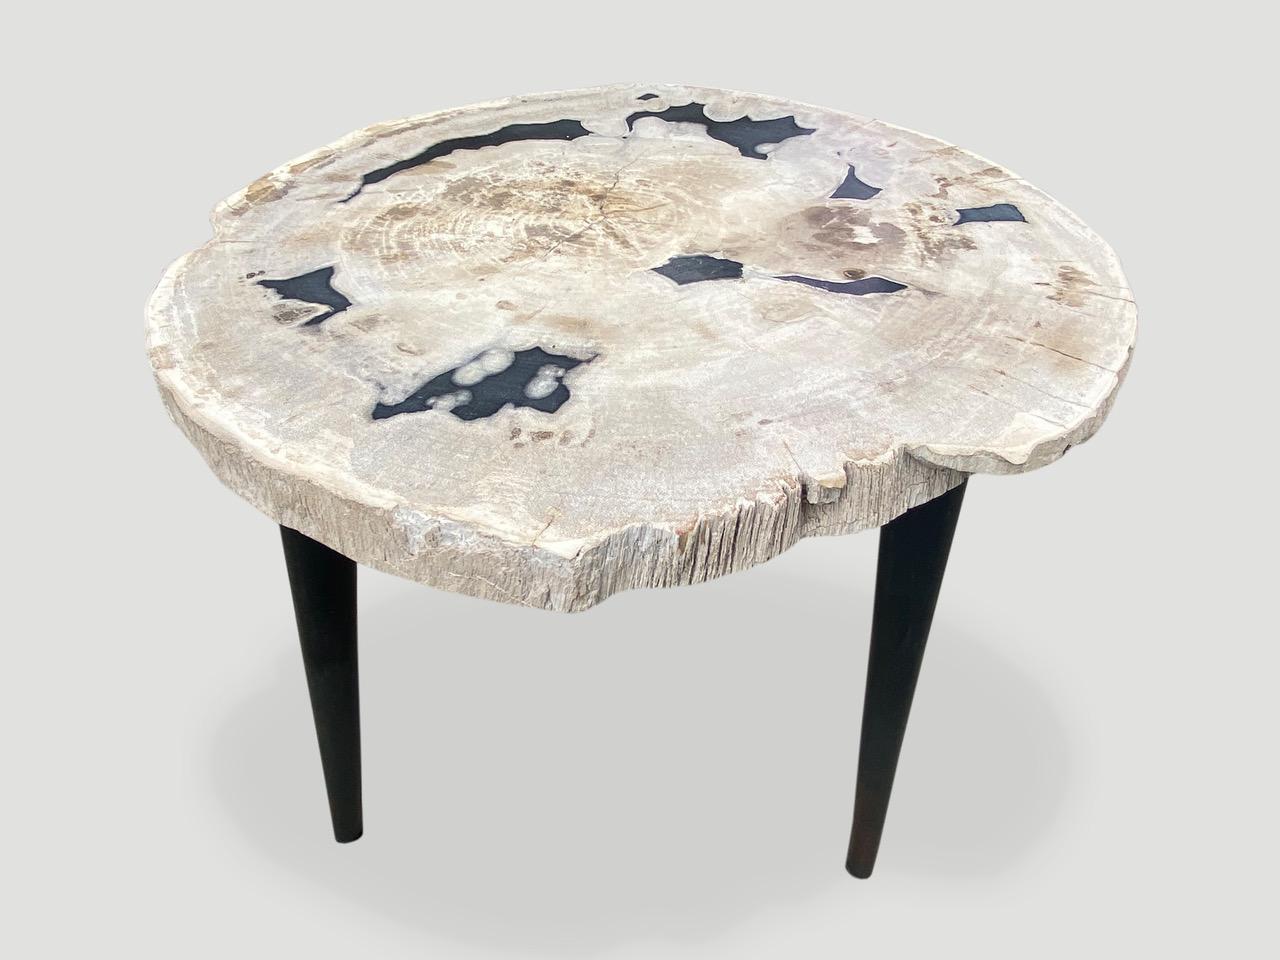 Andrianna Shamaris Petrified Wood Slab Table with Steel Base In Excellent Condition For Sale In New York, NY